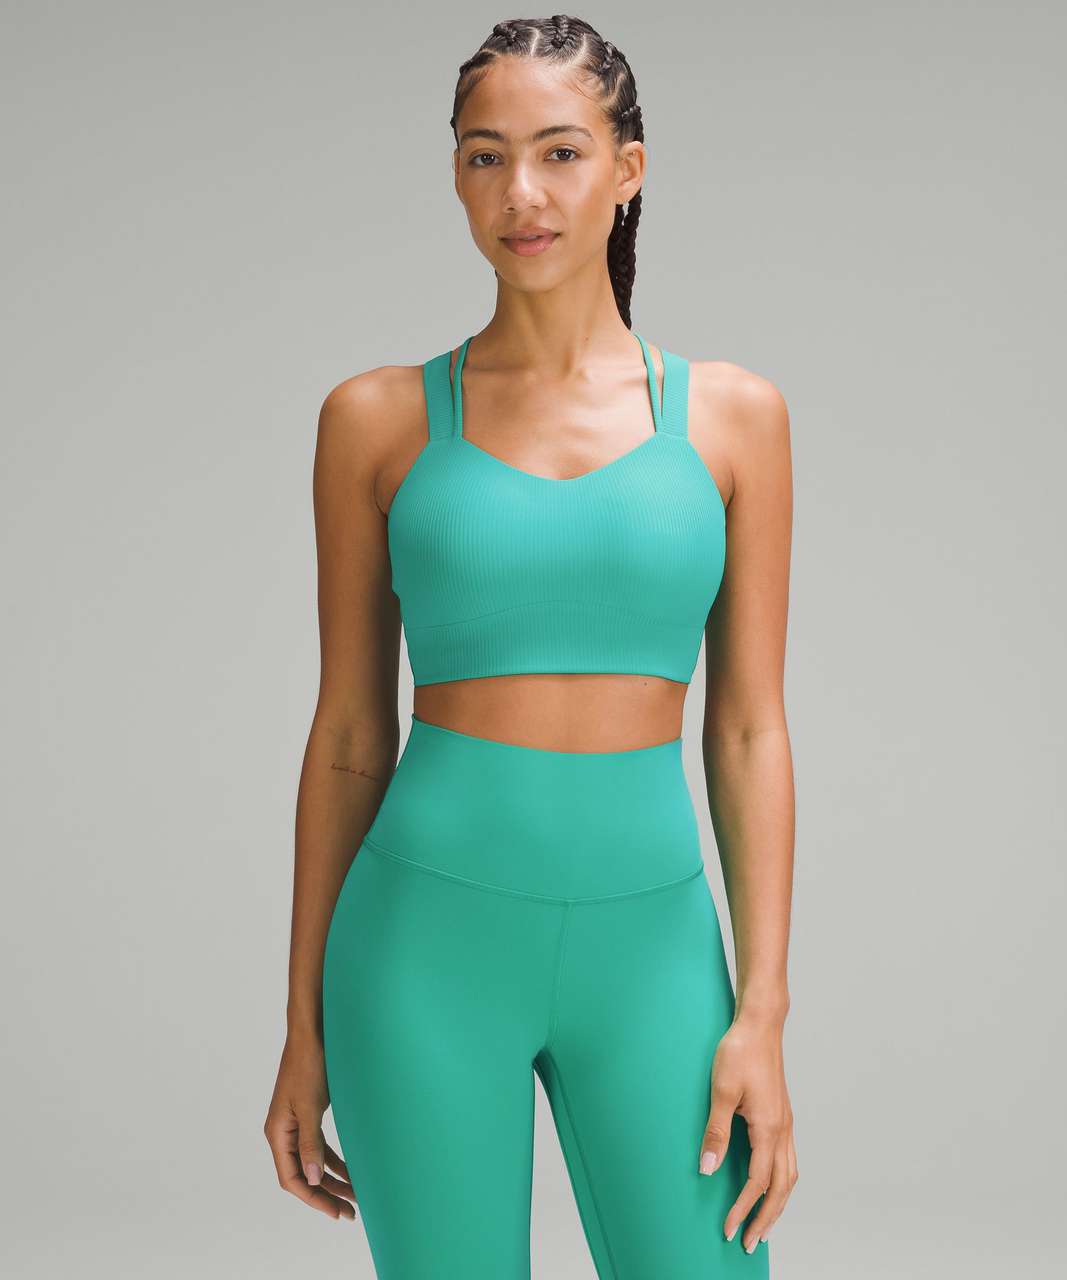 Lululemon Like A Cloud Longline Bra Tan Size M - $40 (18% Off Retail) New  With Tags - From Kelly